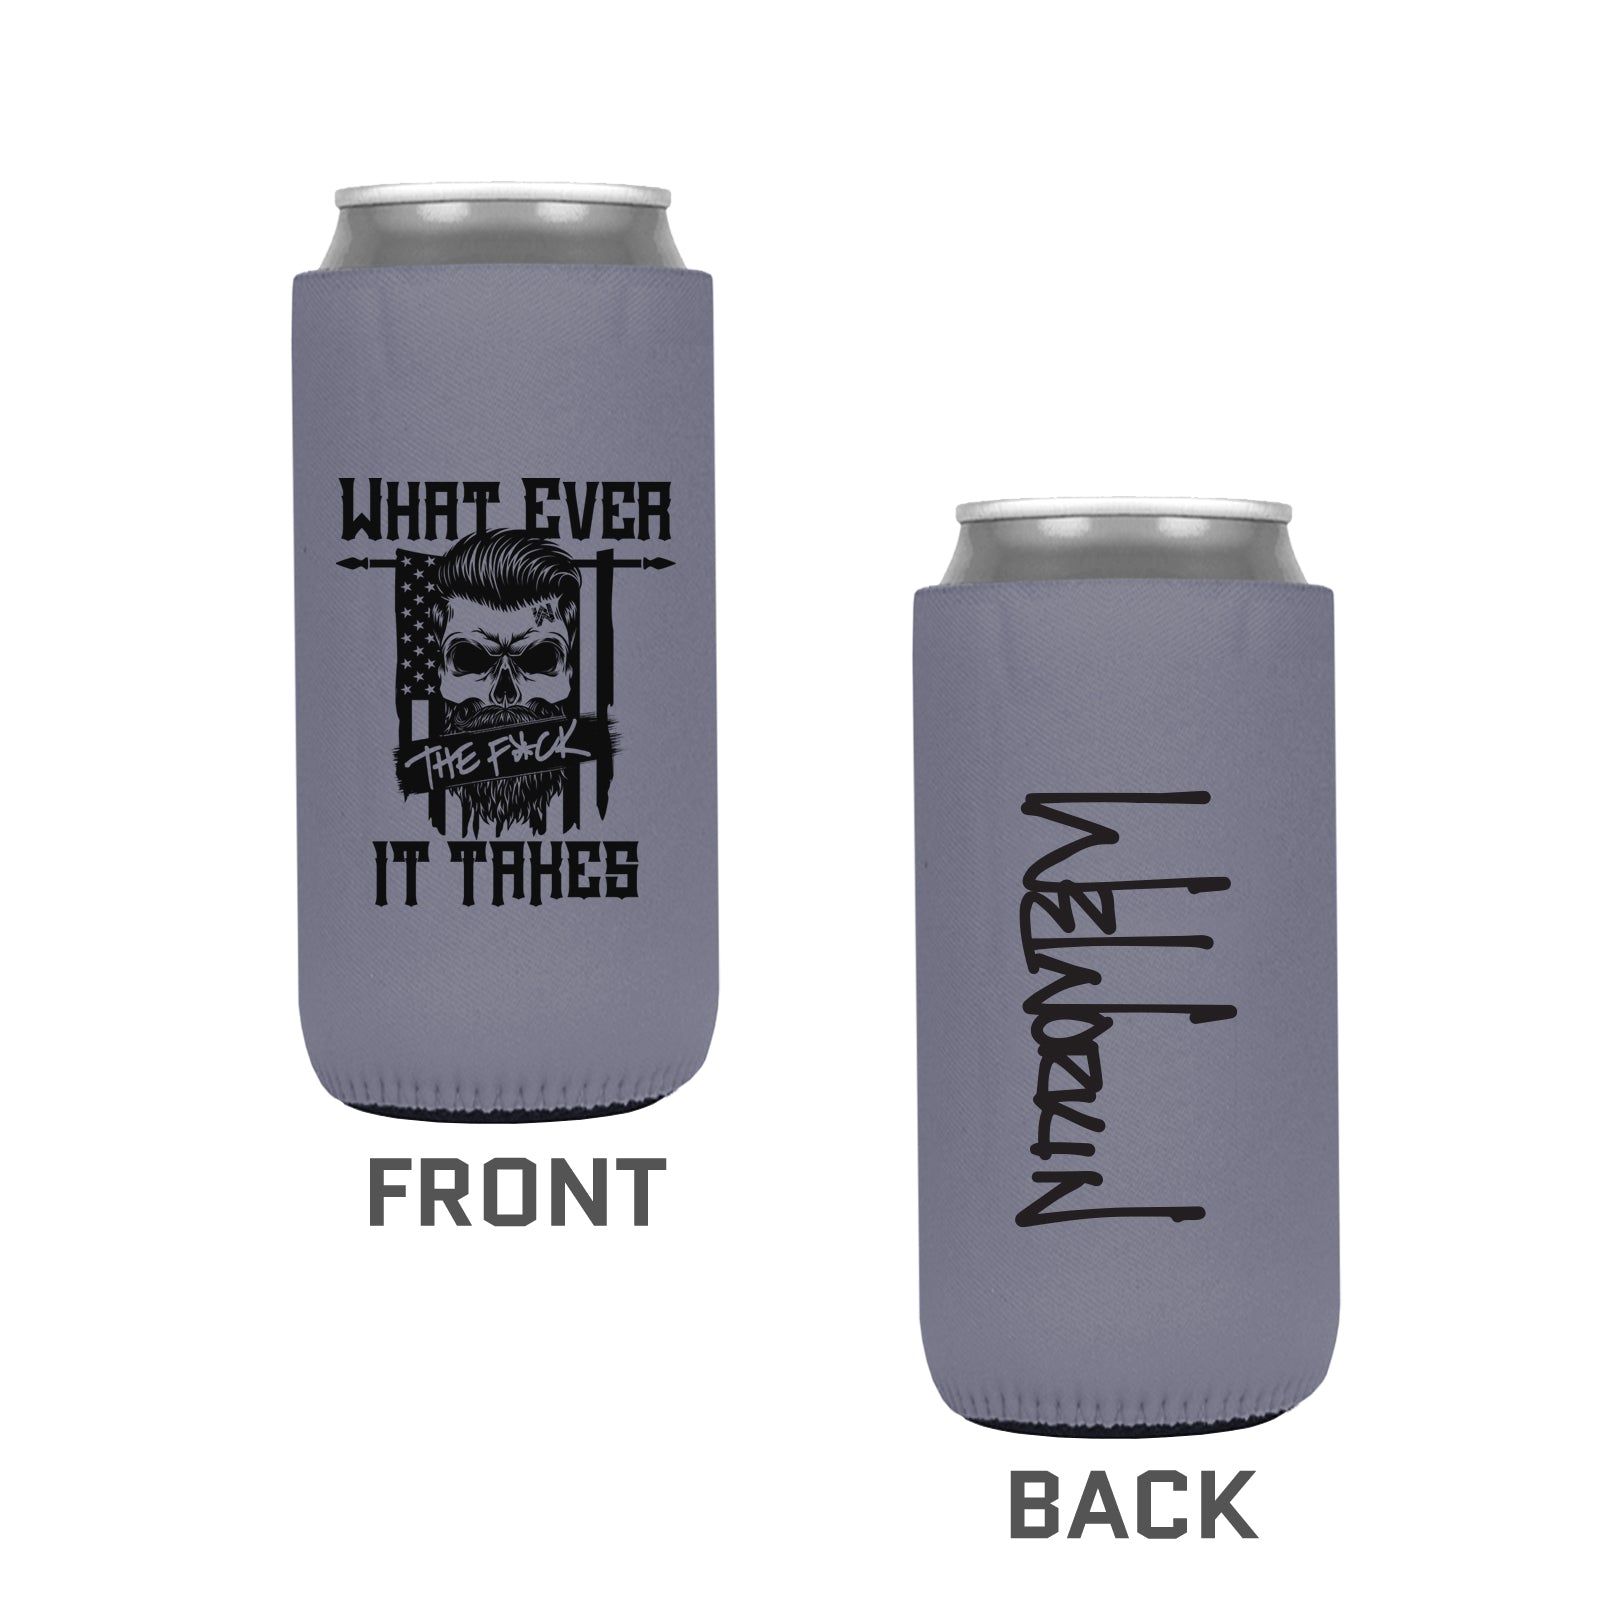 Grey koozie pictured on white background (front and back). This slim/tall 12oz koozie is printed on one side with the "What Ever the F*ck It Takes" Flag/Skull graphic and the other with the WeWorkin script logo in black ink. 